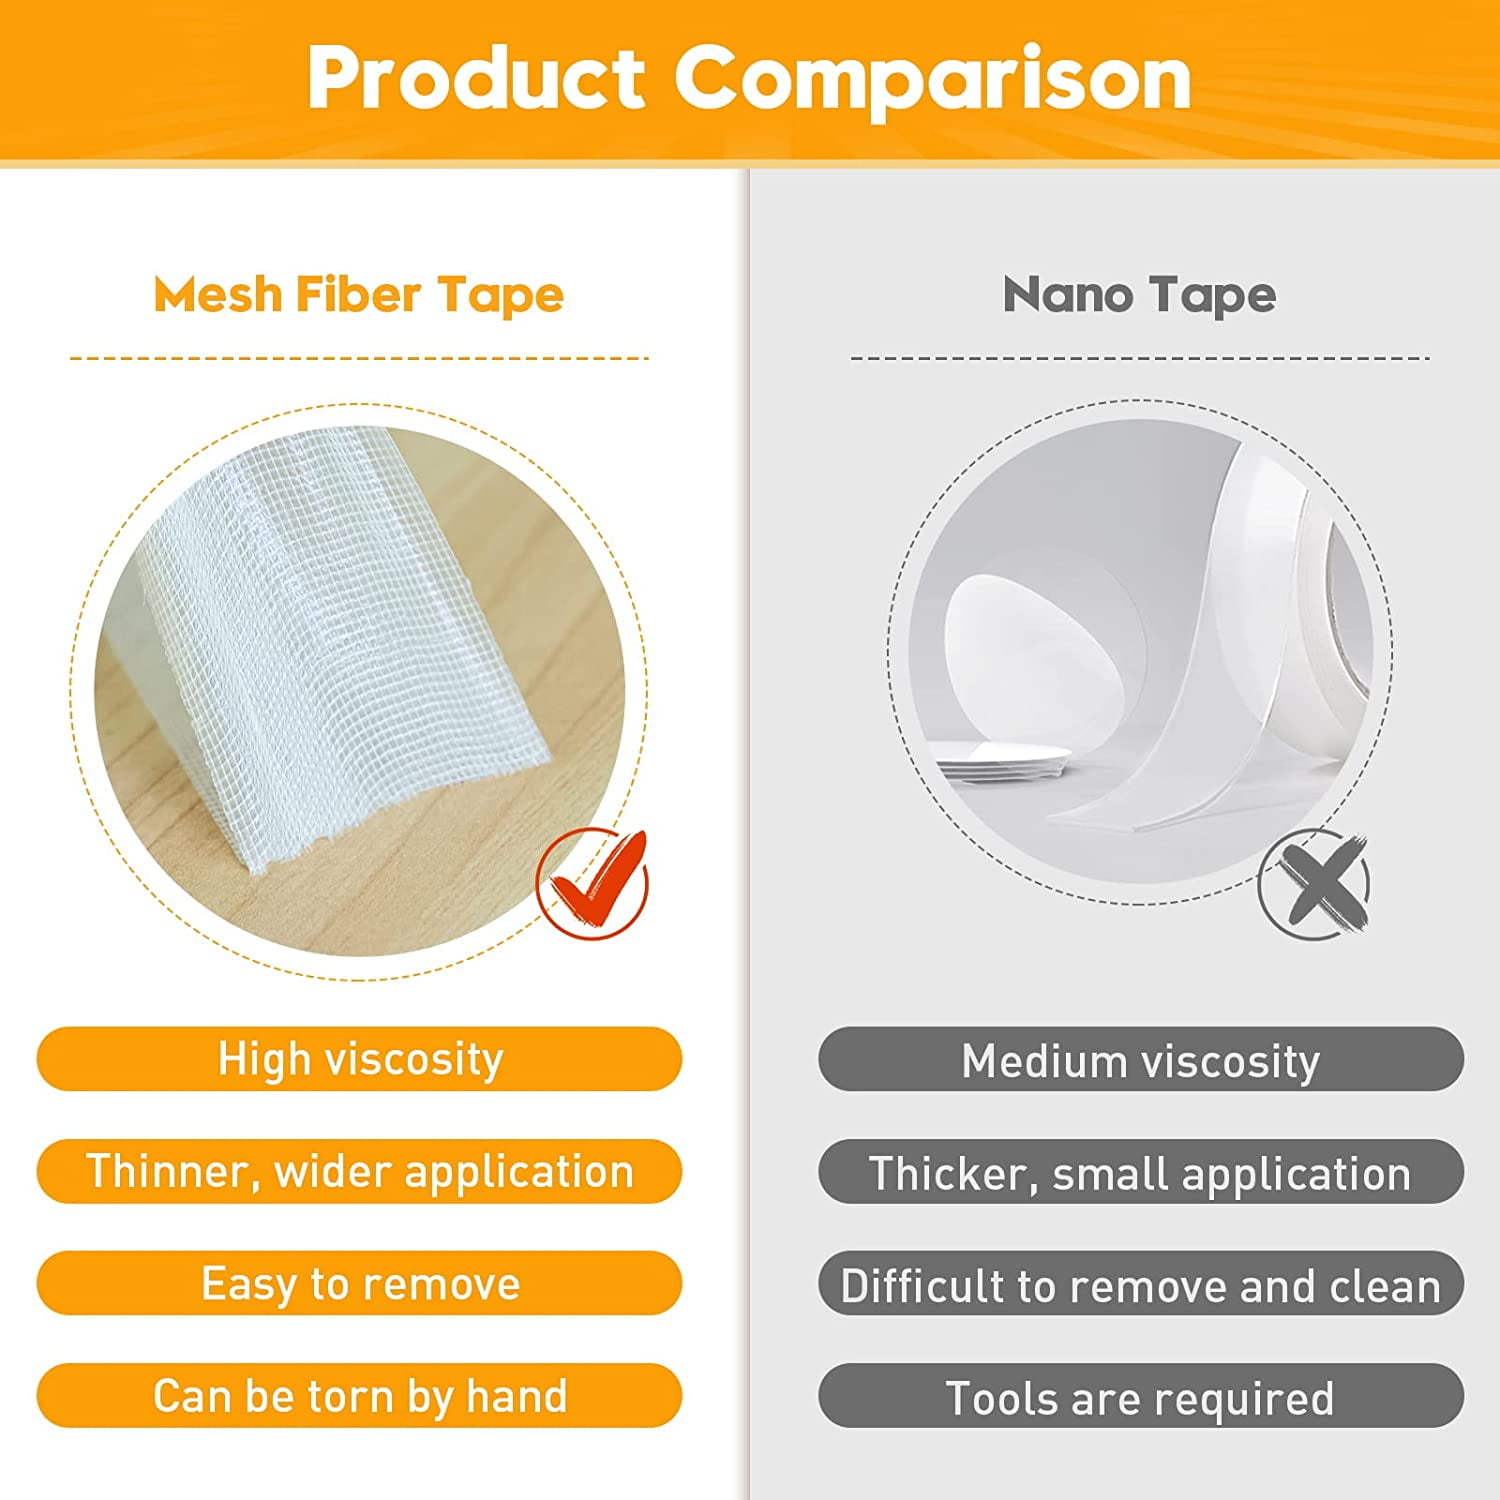 MILEQEE Double Sided Tape Heavy Duty, 1.18 x 66FT, Universal High Tack Strong  Wall Adhesive with Fiberglass Mesh, Super Sticky Resistente Clear Tape,  Easy Use Mounting Tape 